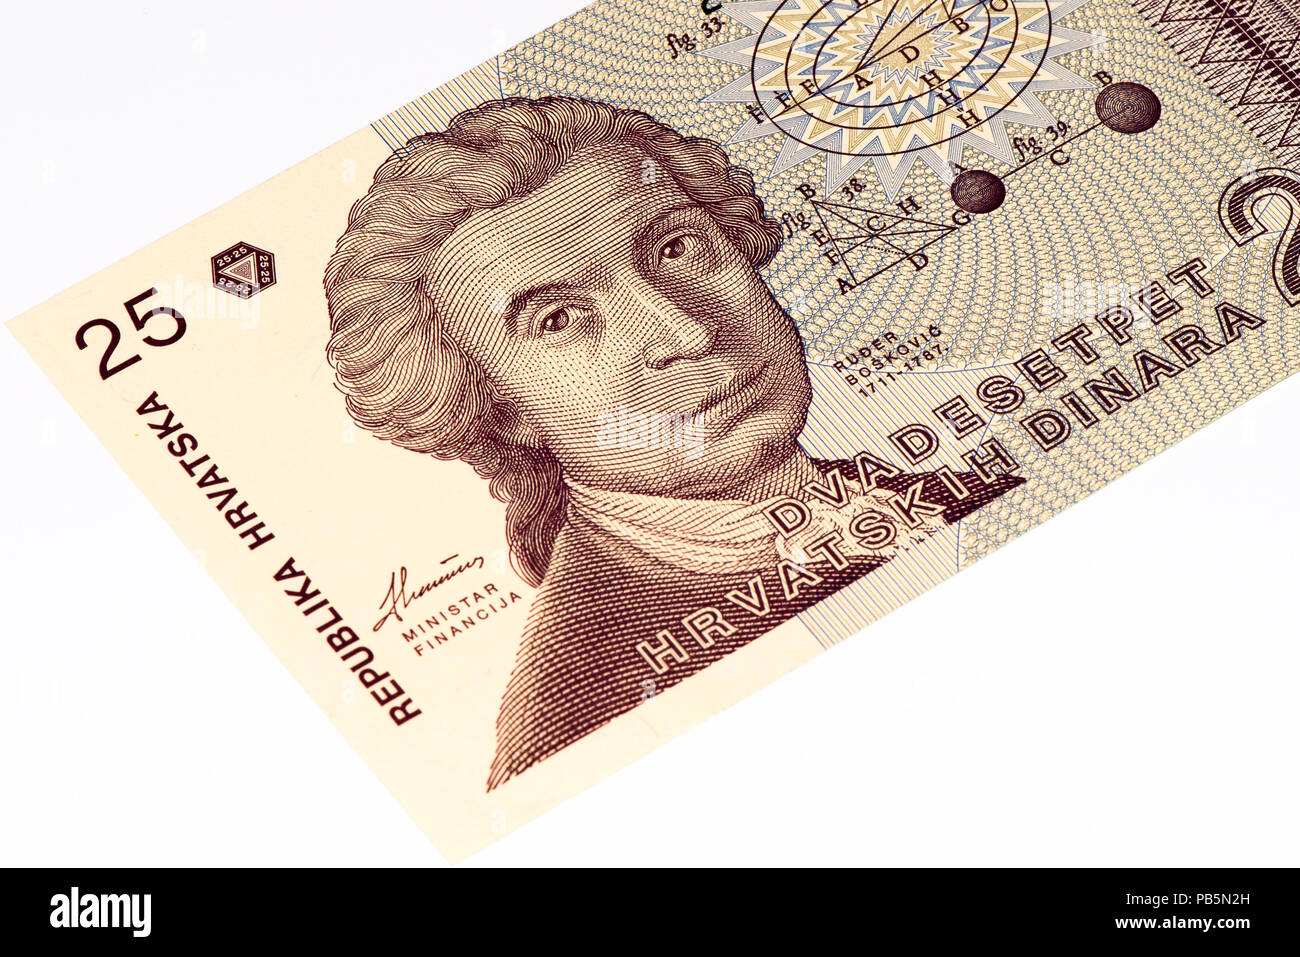 25 Hrvatski dinar bank note. Croatian dinar is the former currency of Croatia Stock Photo